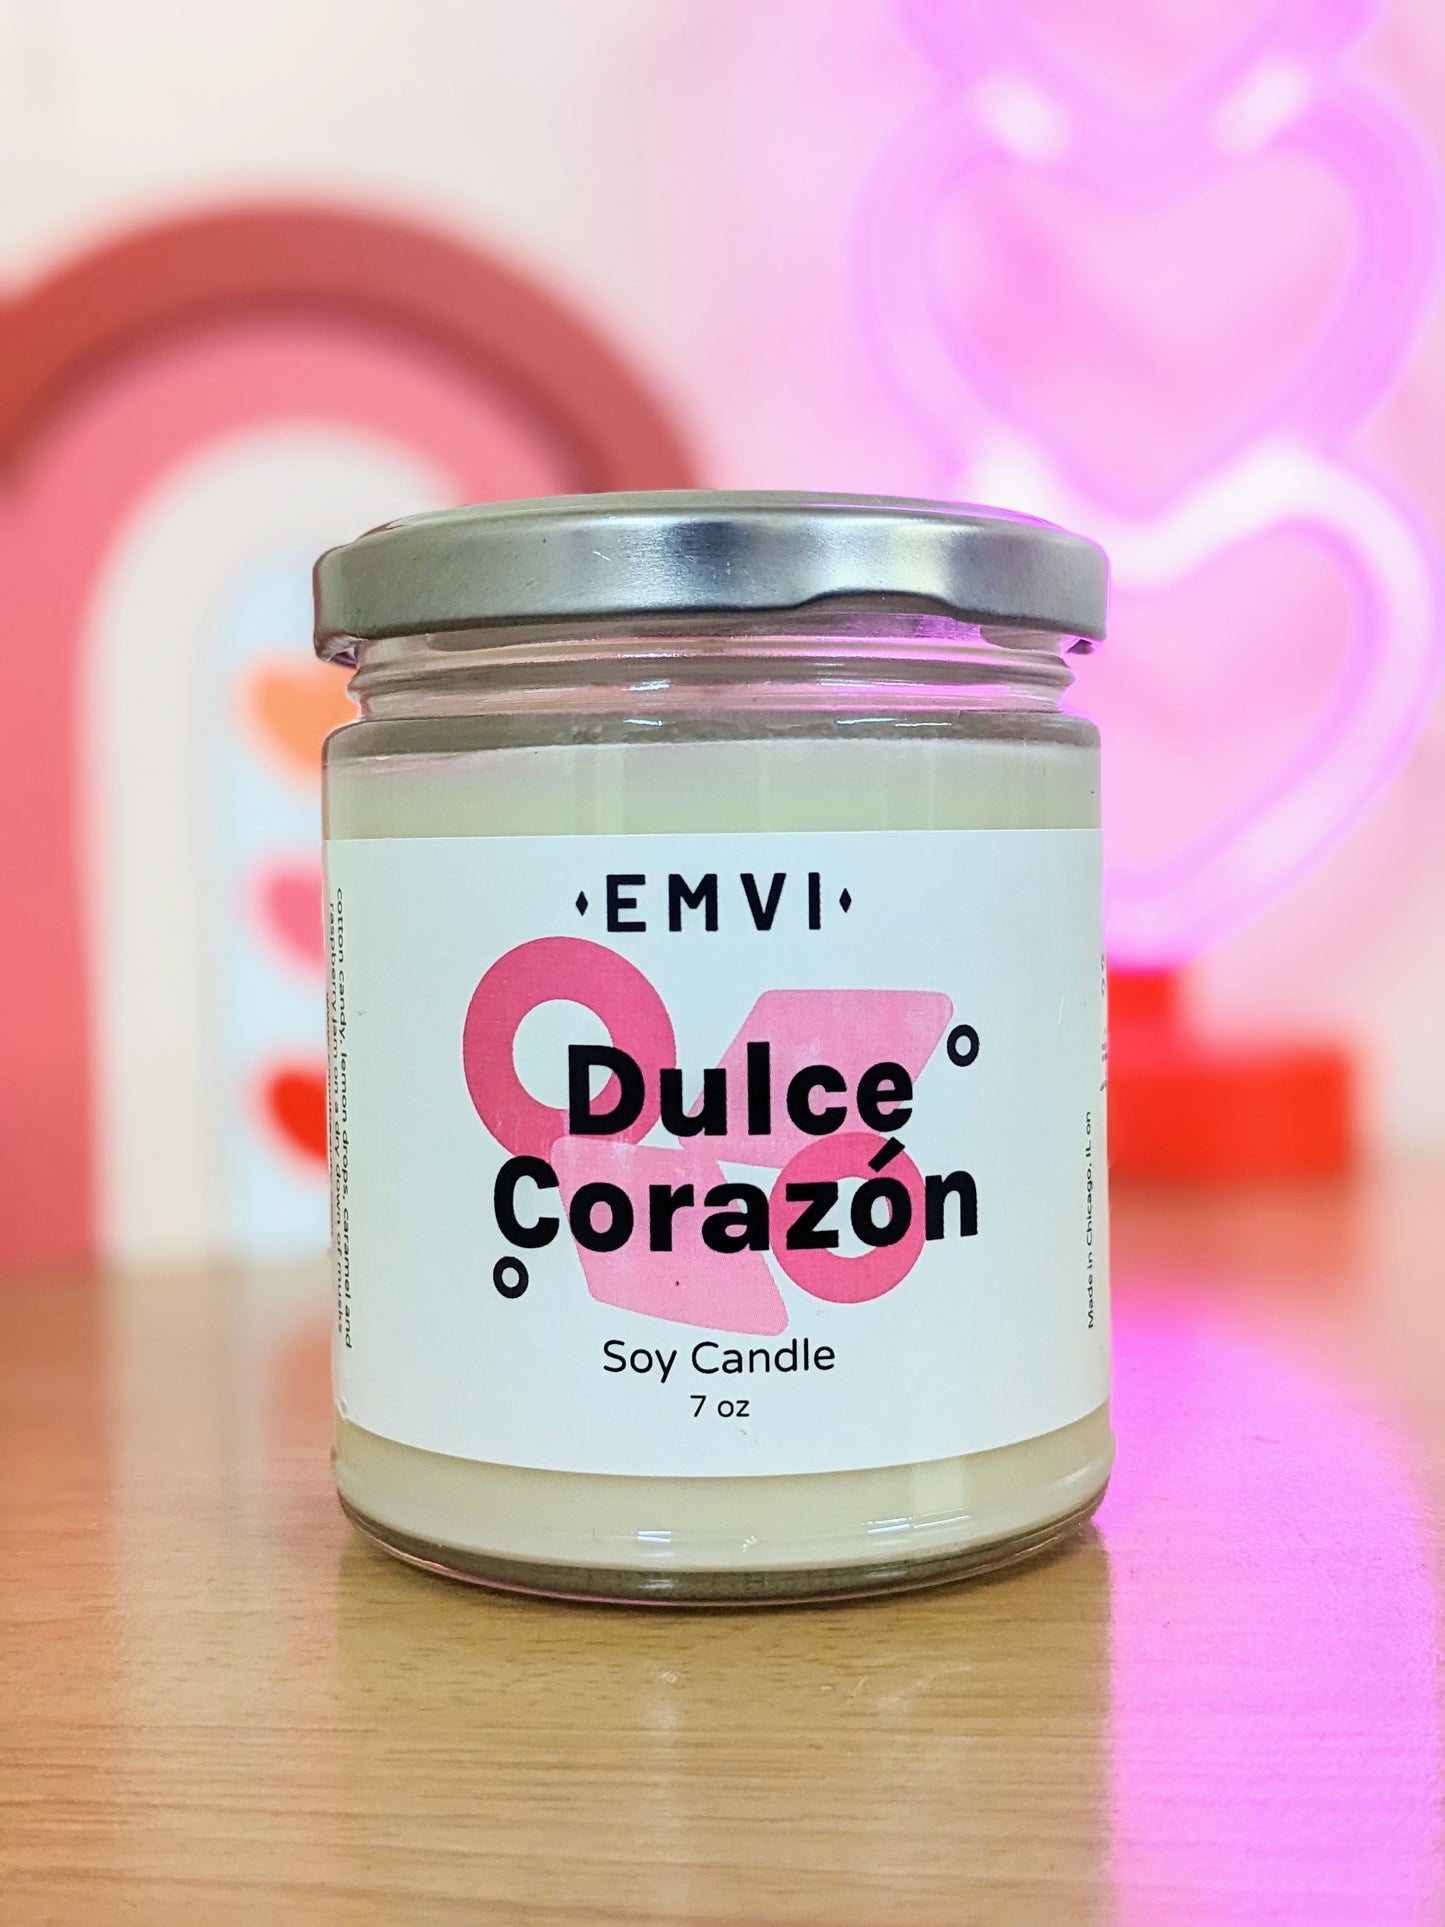 Dulce Corazon Soy Candle